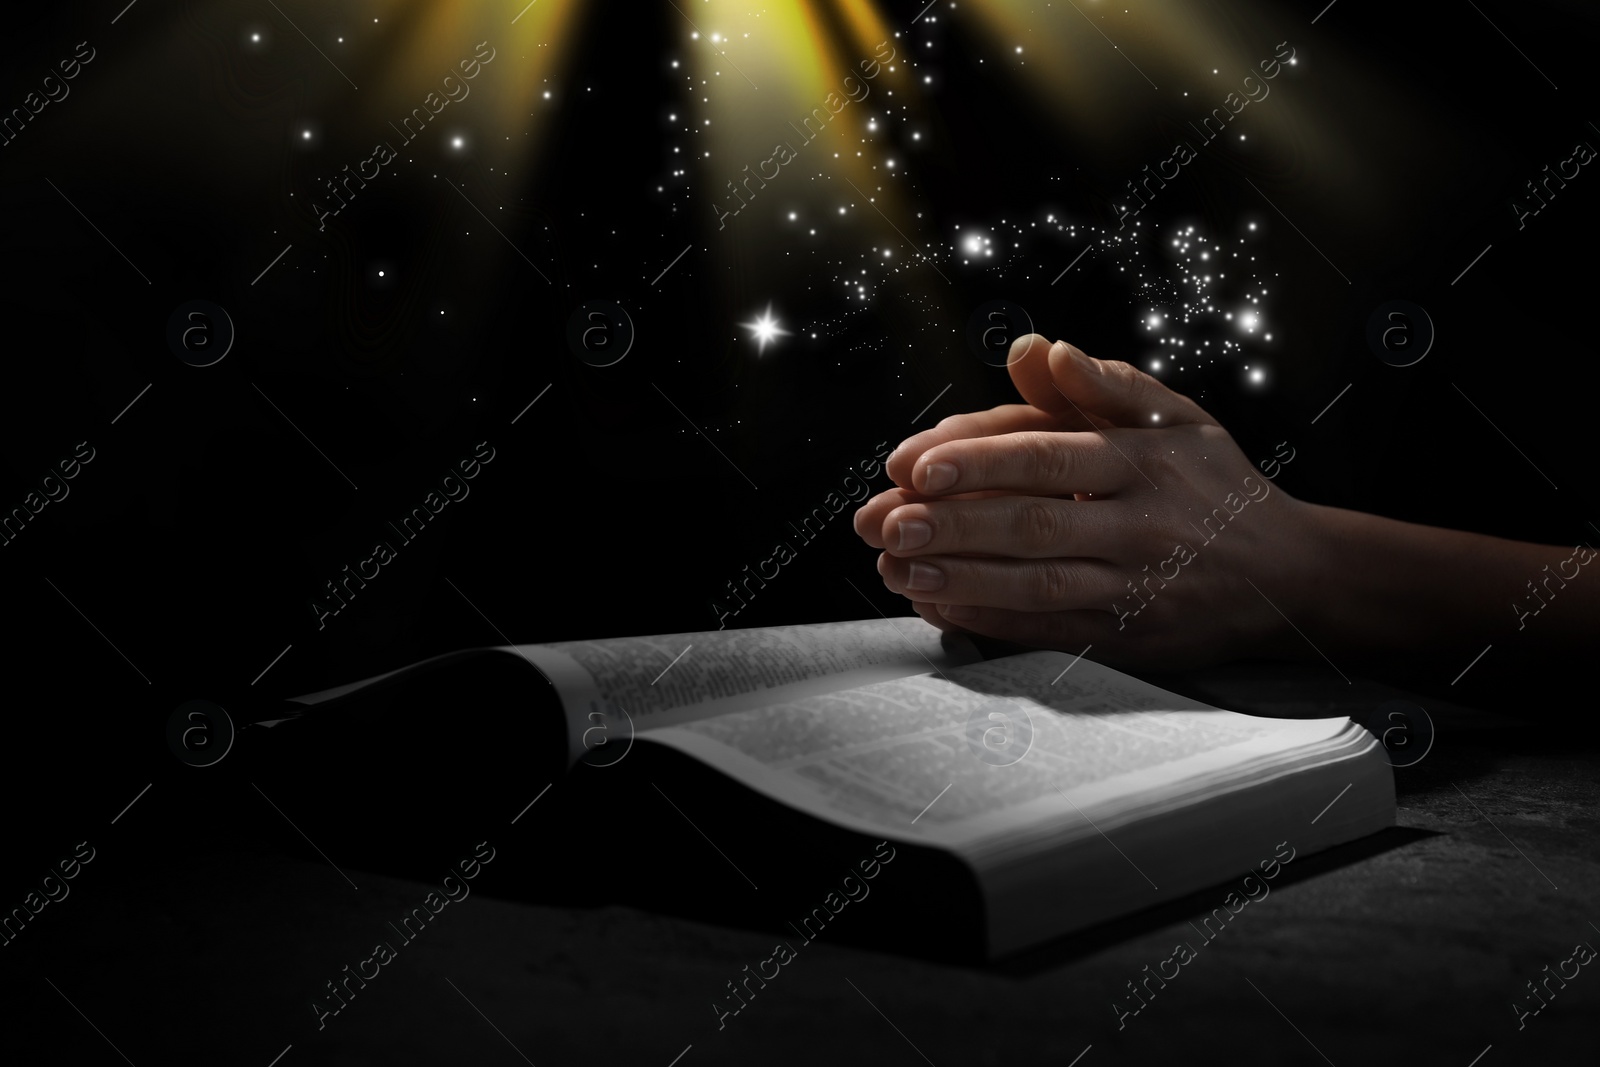 Image of Christian woman praying over Bible under holy light in darkness, closeup